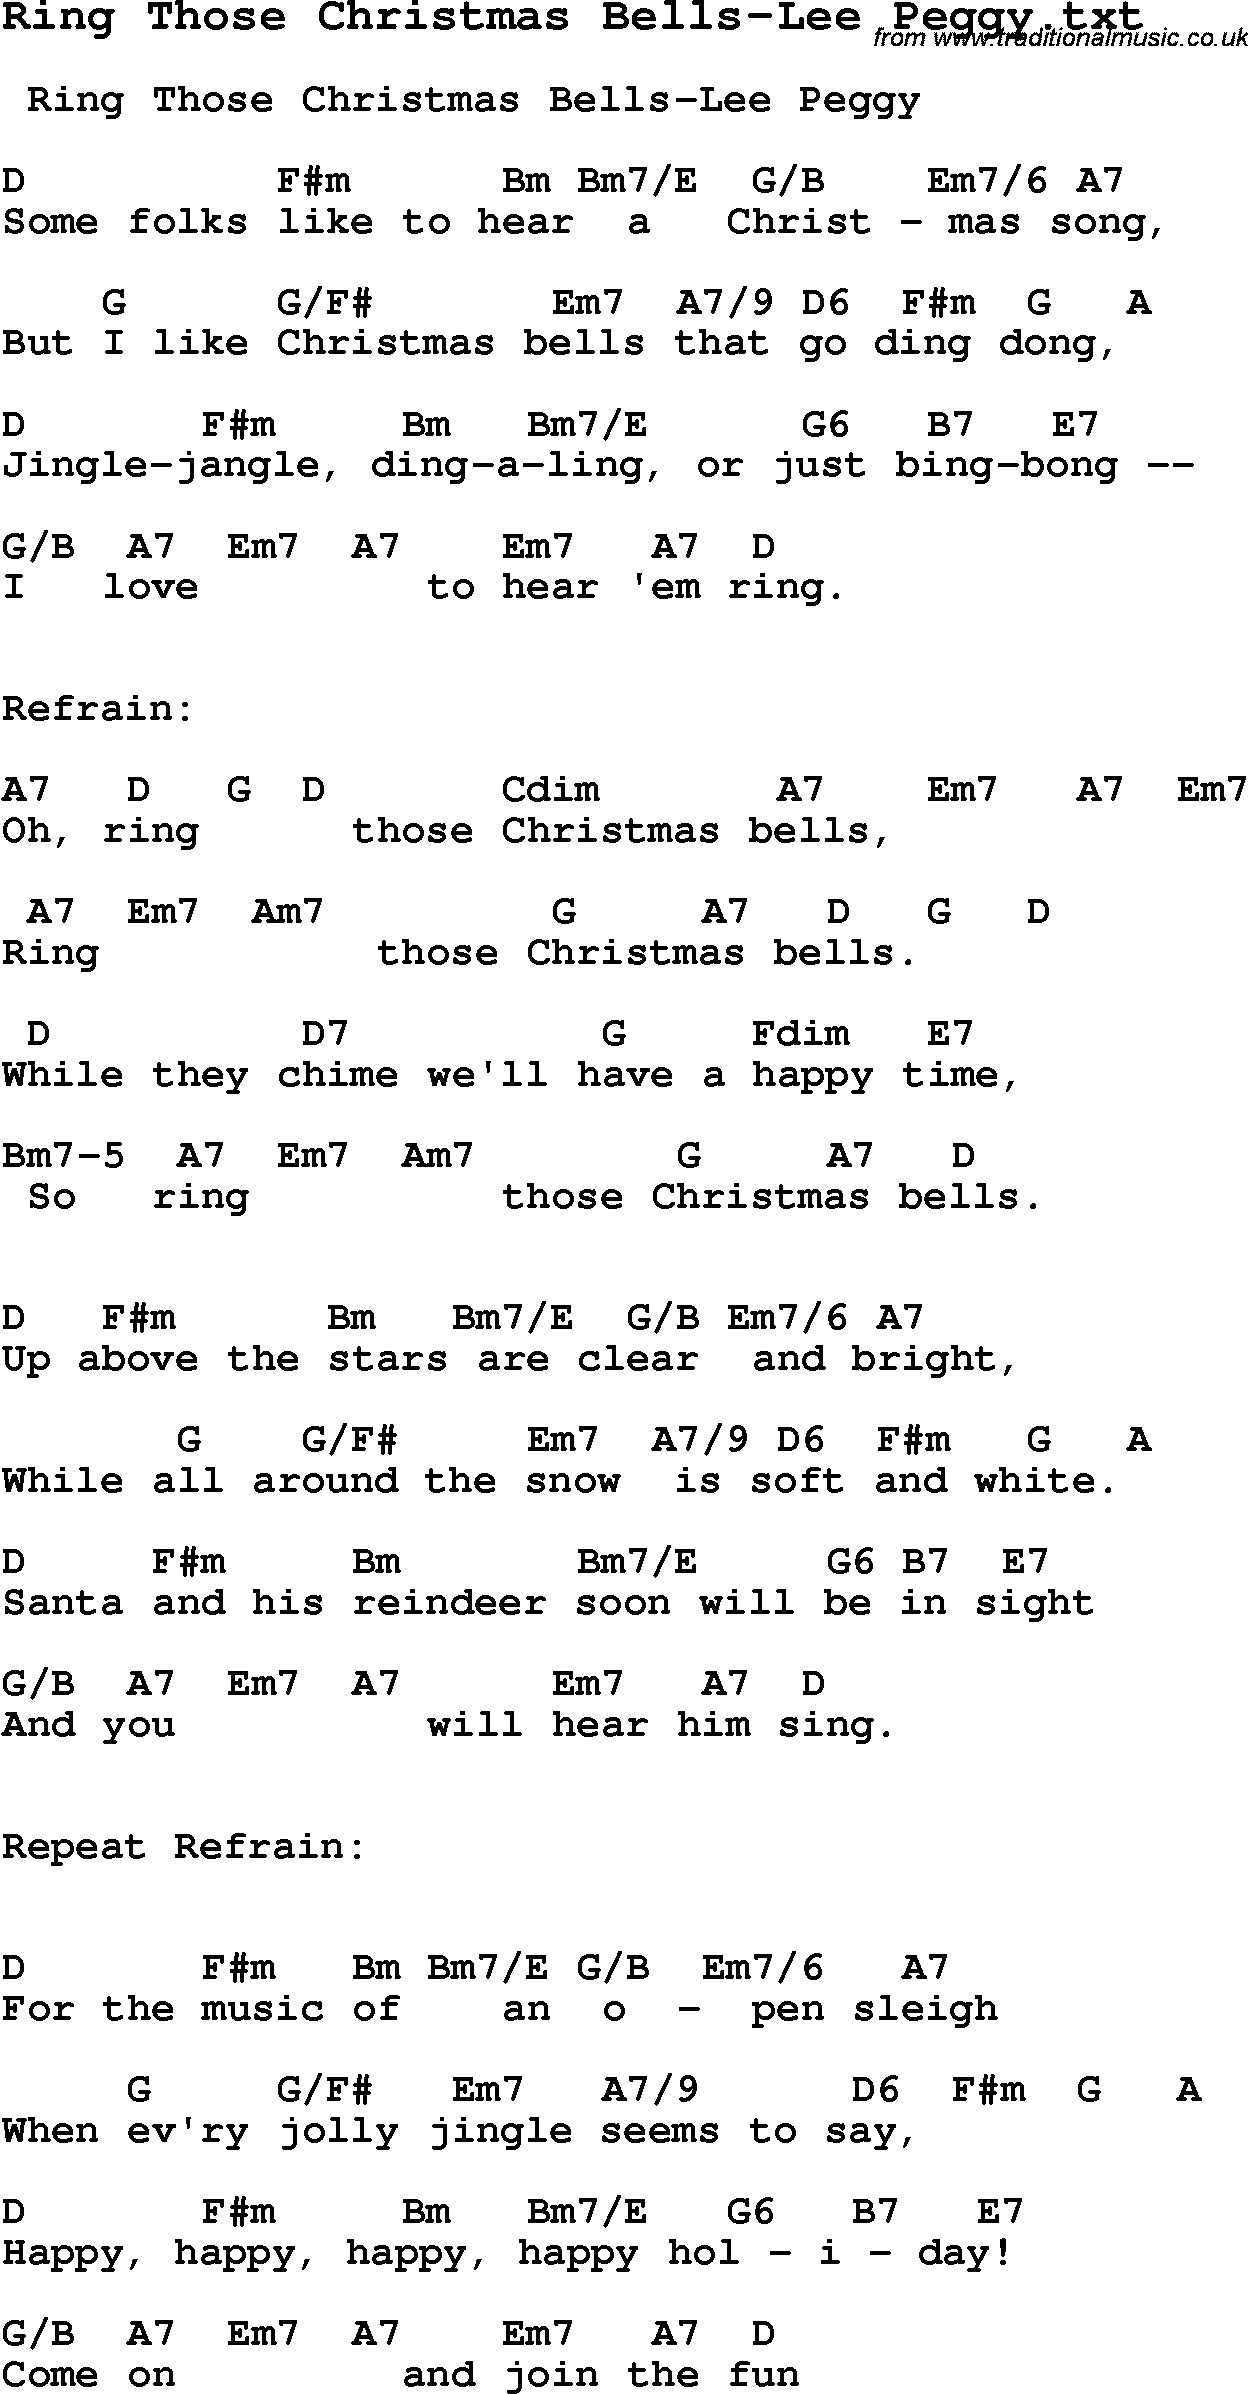 Jazz Song - Ring Those Christmas Bells-Lee Peggy with Chords, Tabs and Lyrics from top bands and ...